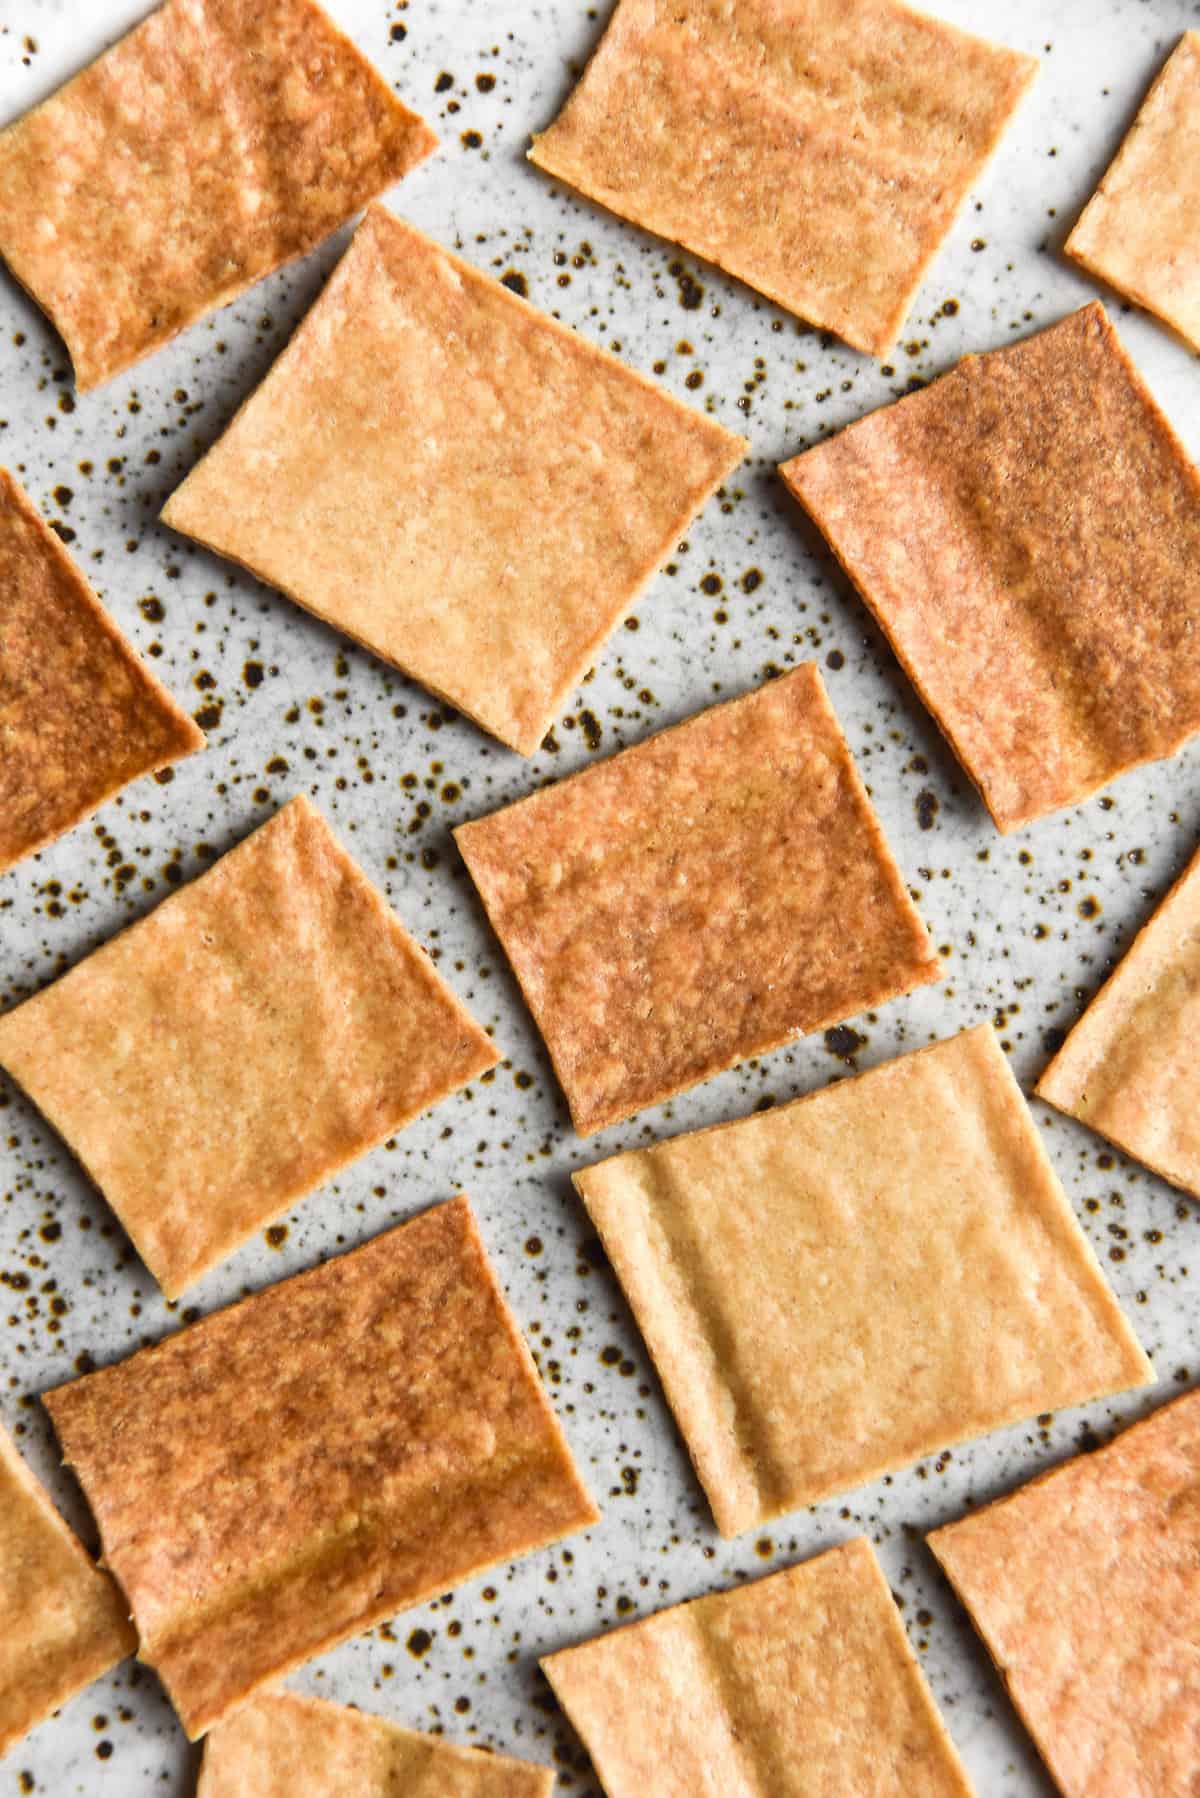 Gluten free sourdough discard crackers with brown butter. FODMAP friendly and nut free - the perfect solution to maintaining a no-waste gluten free sourdough starter. Recipe from www.georgeats.com